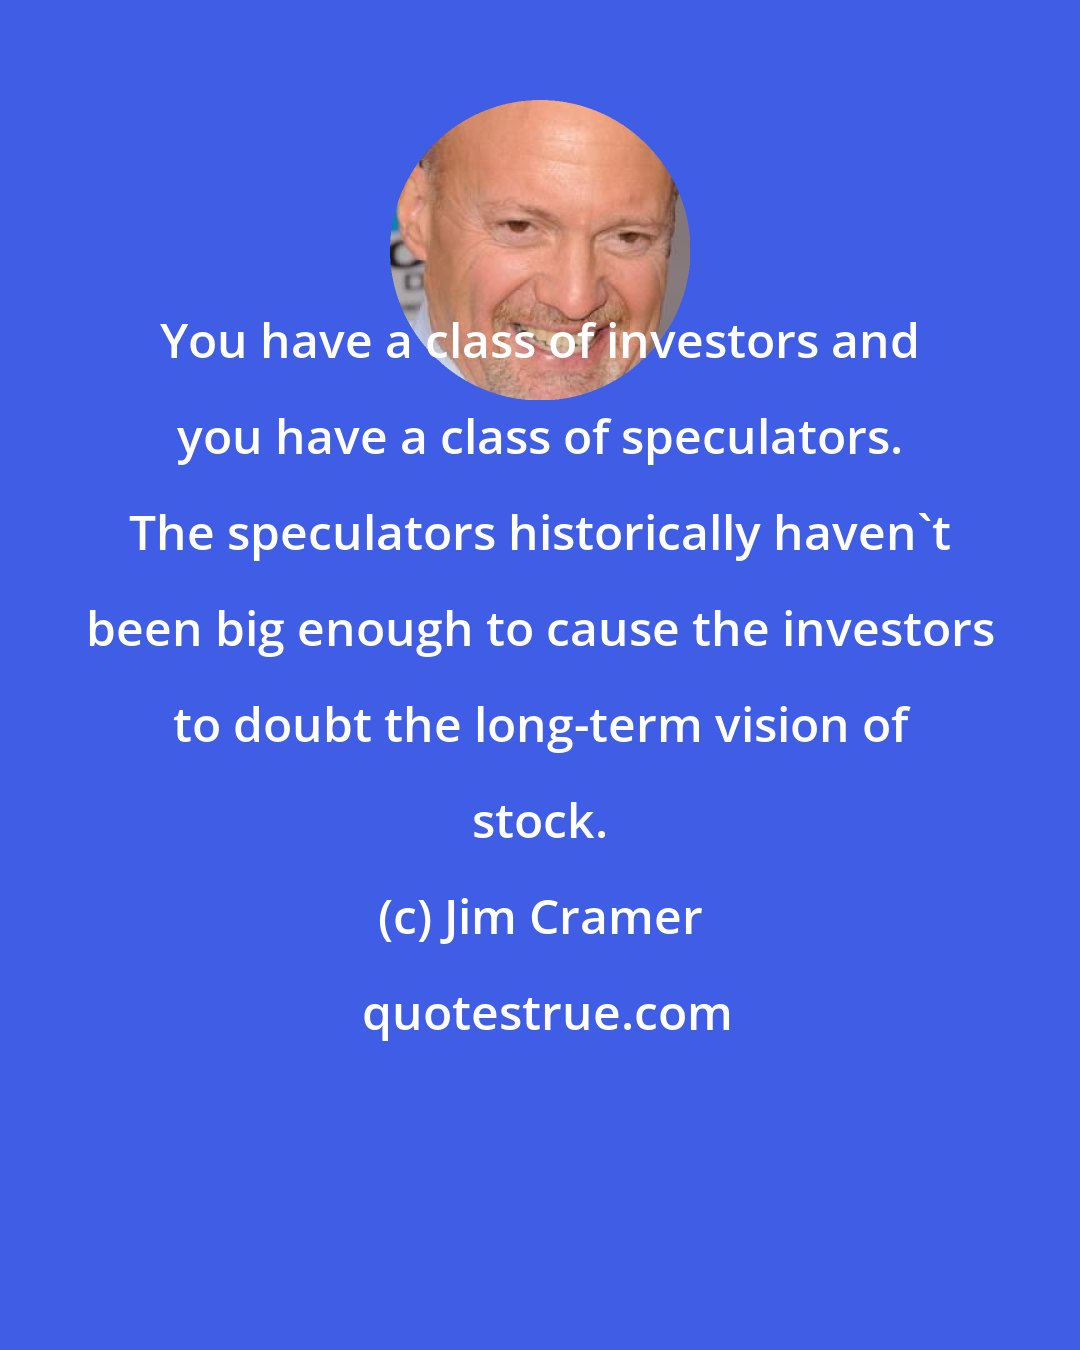 Jim Cramer: You have a class of investors and you have a class of speculators. The speculators historically haven't been big enough to cause the investors to doubt the long-term vision of stock.